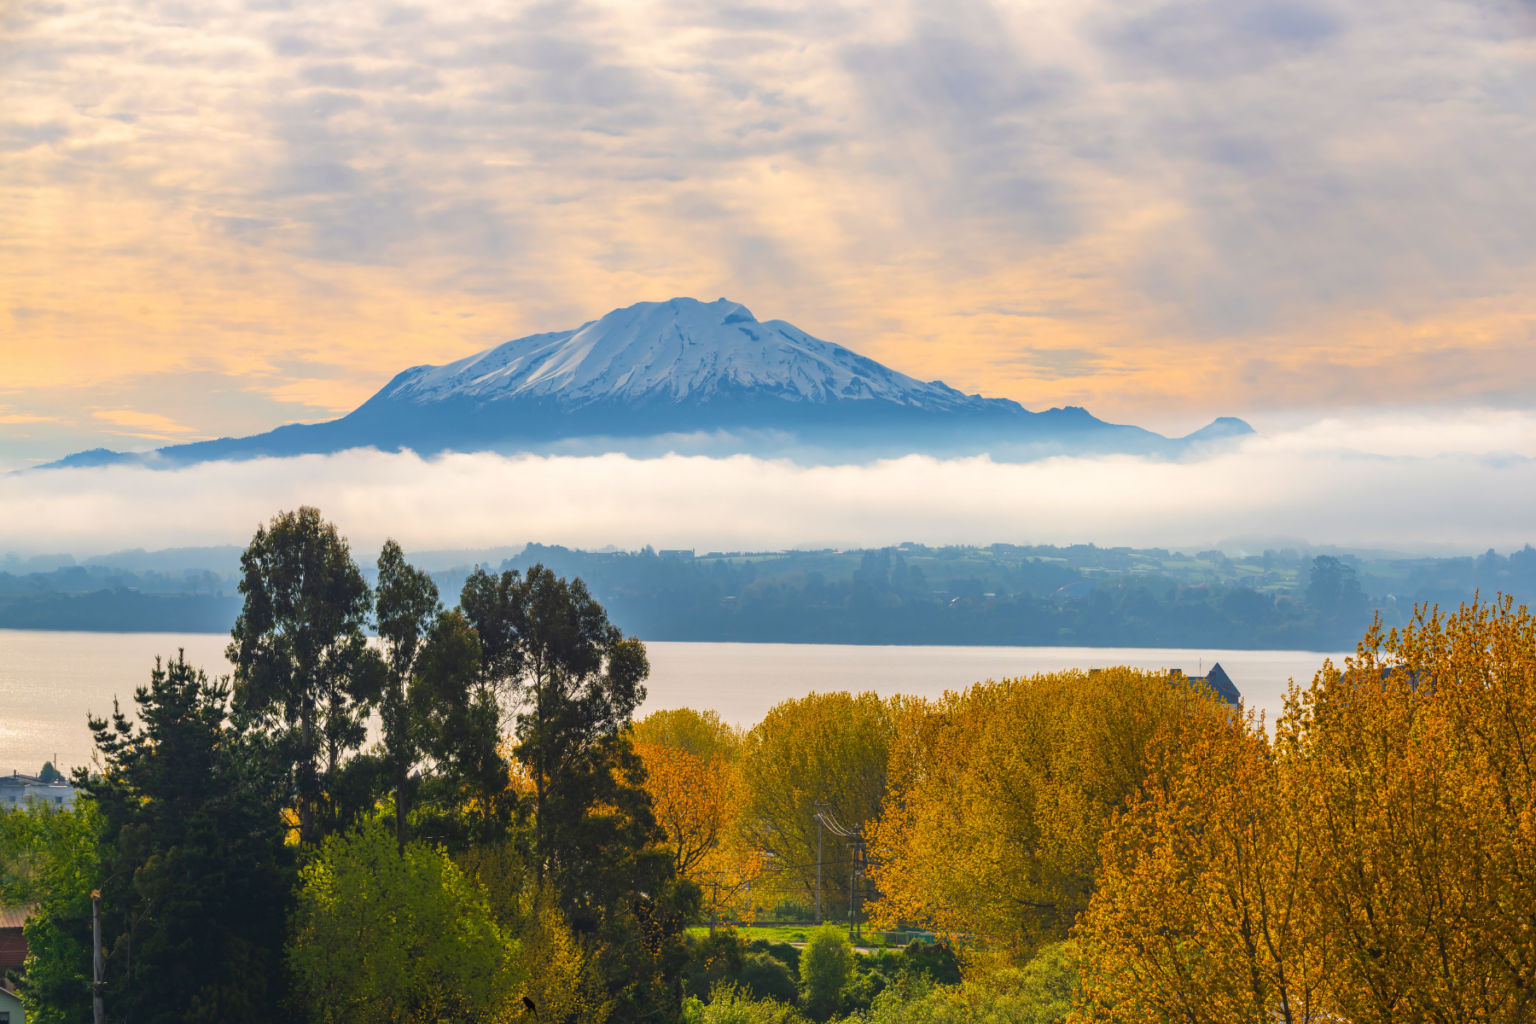 View of snow-capped Osorno volcano with a line of clouds halfway down with trees and the lake in the foreground